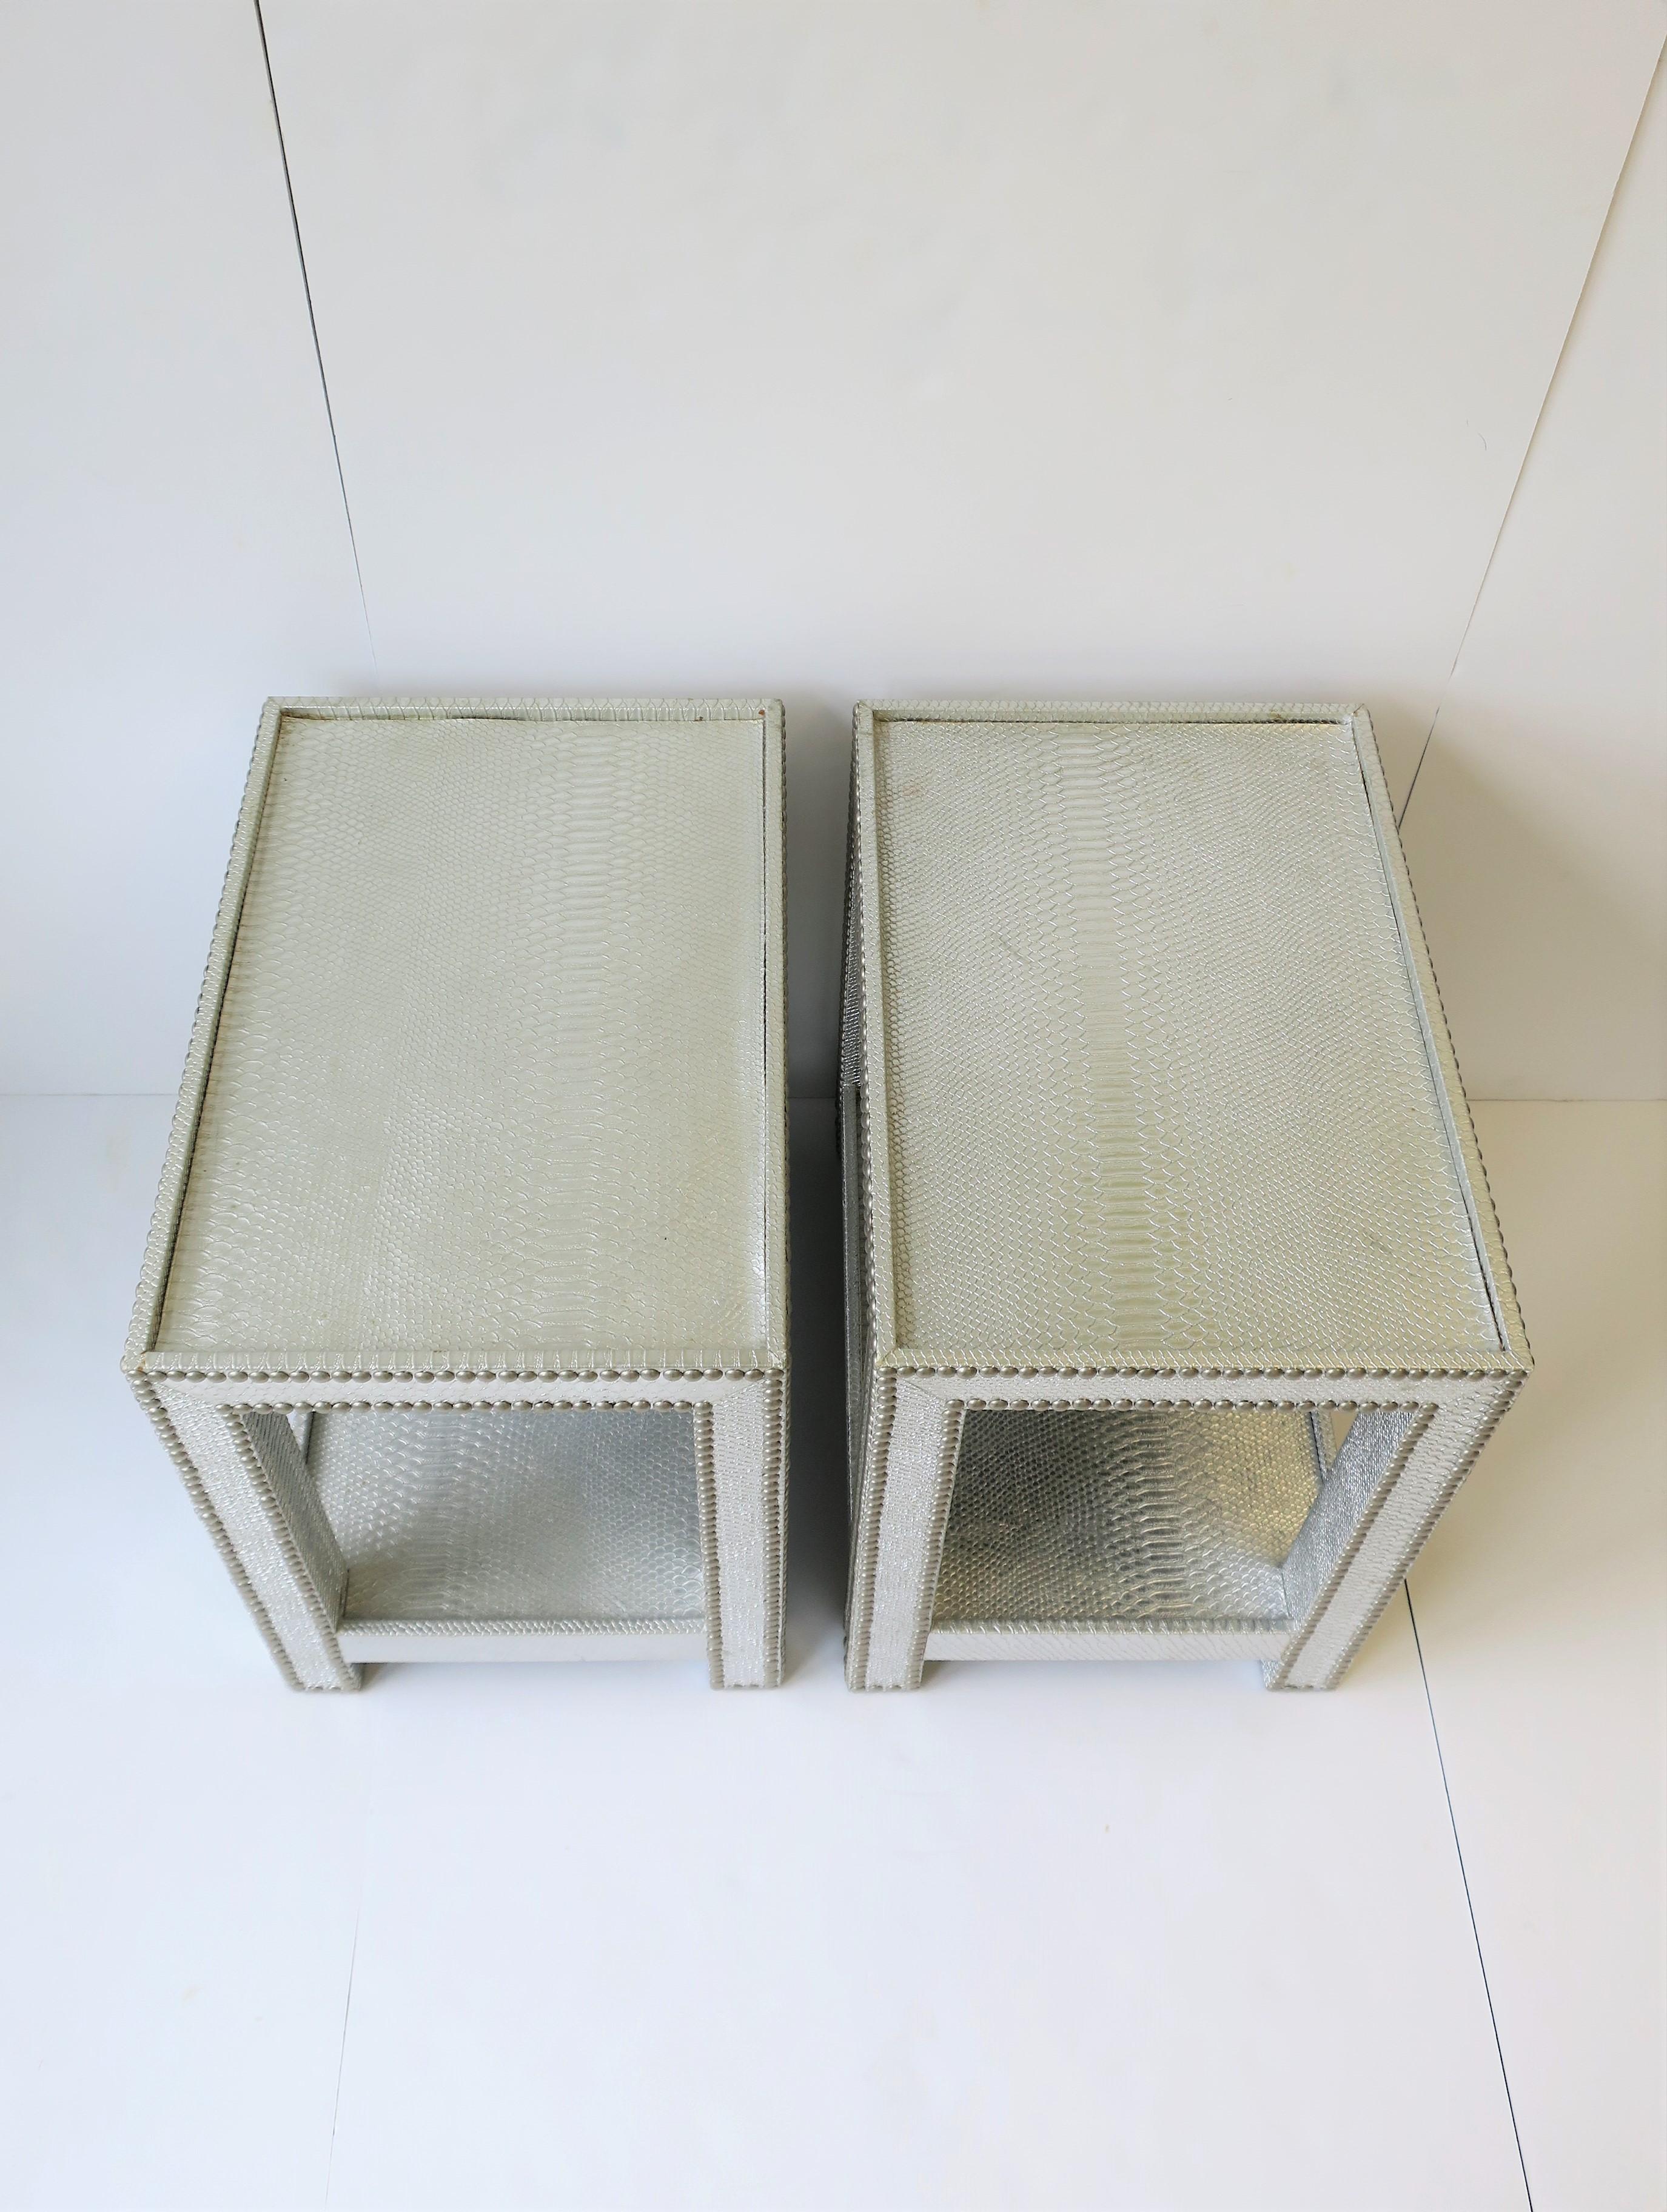 American End or Nightstand Tables with Silver Snakeskin-esque Design